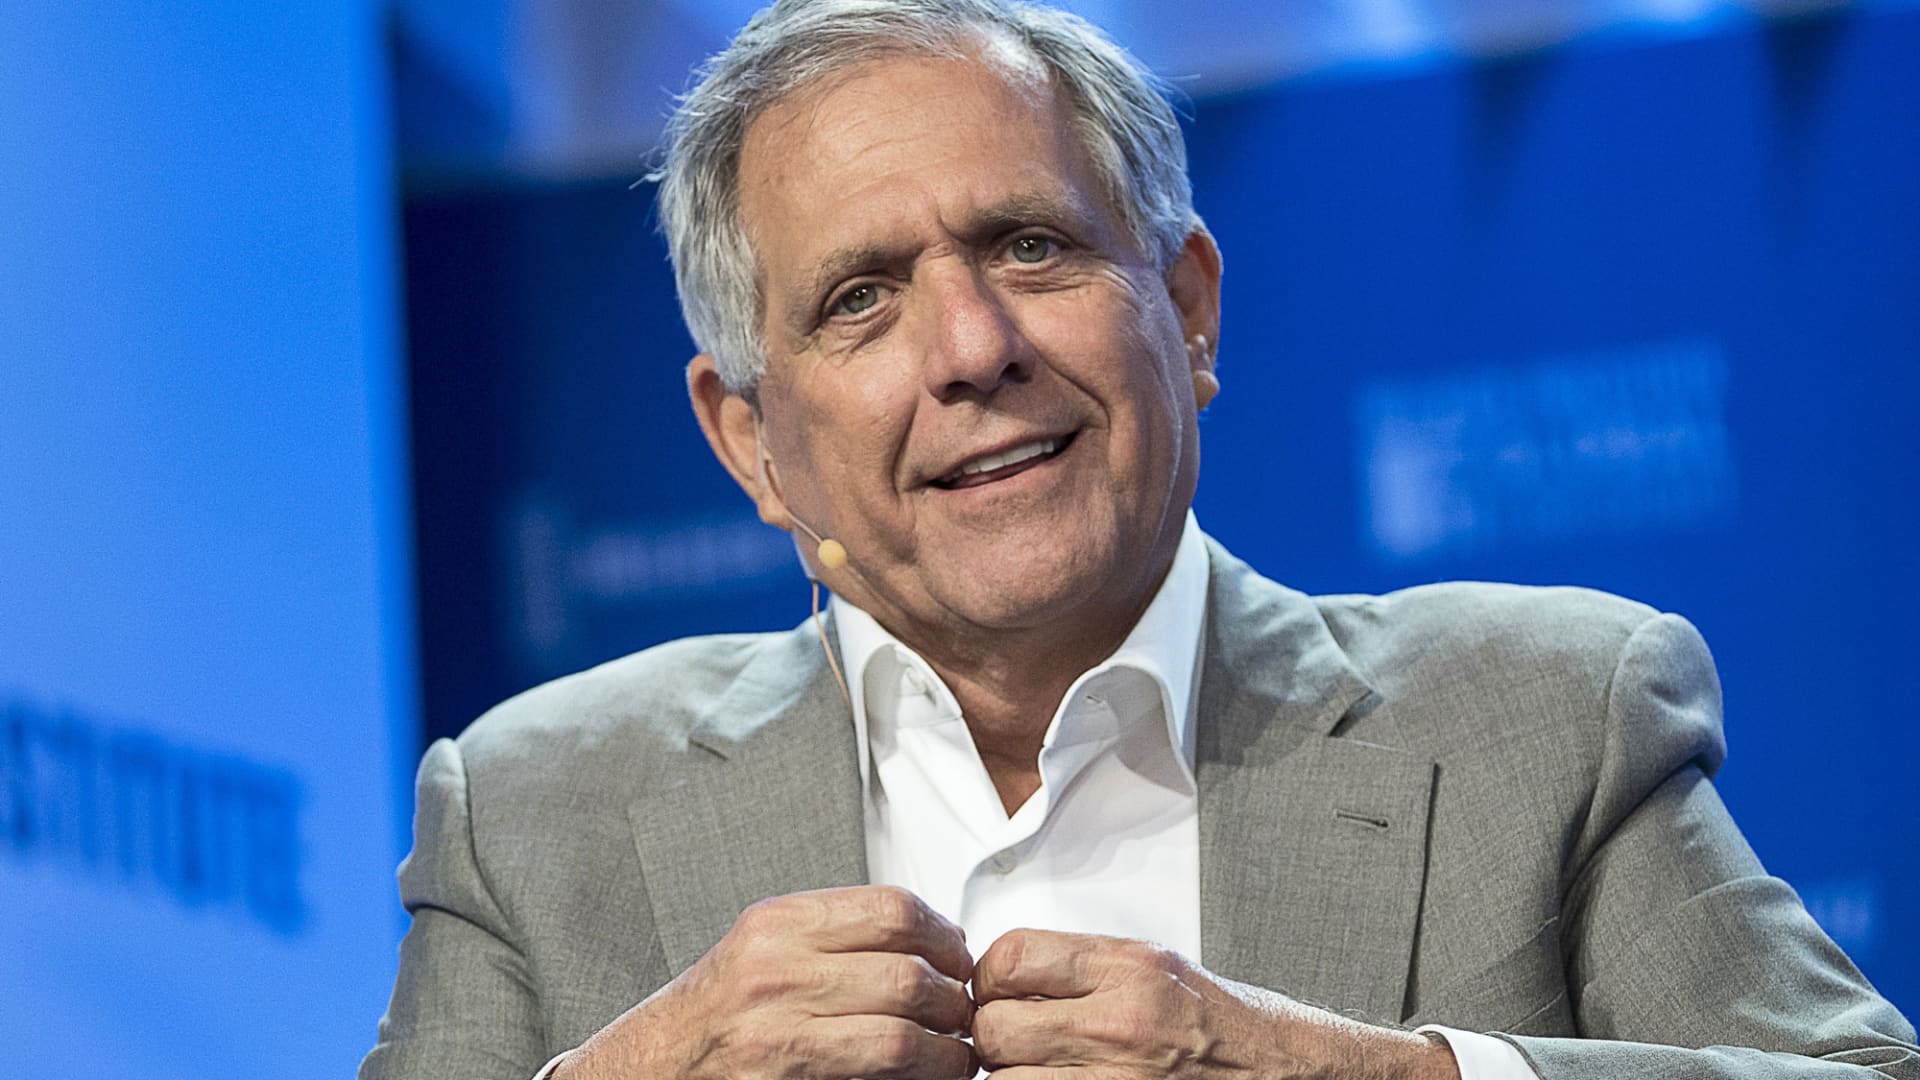 LAPD captain warned CBS about Les Moonves sexual assault claim, NY AG says